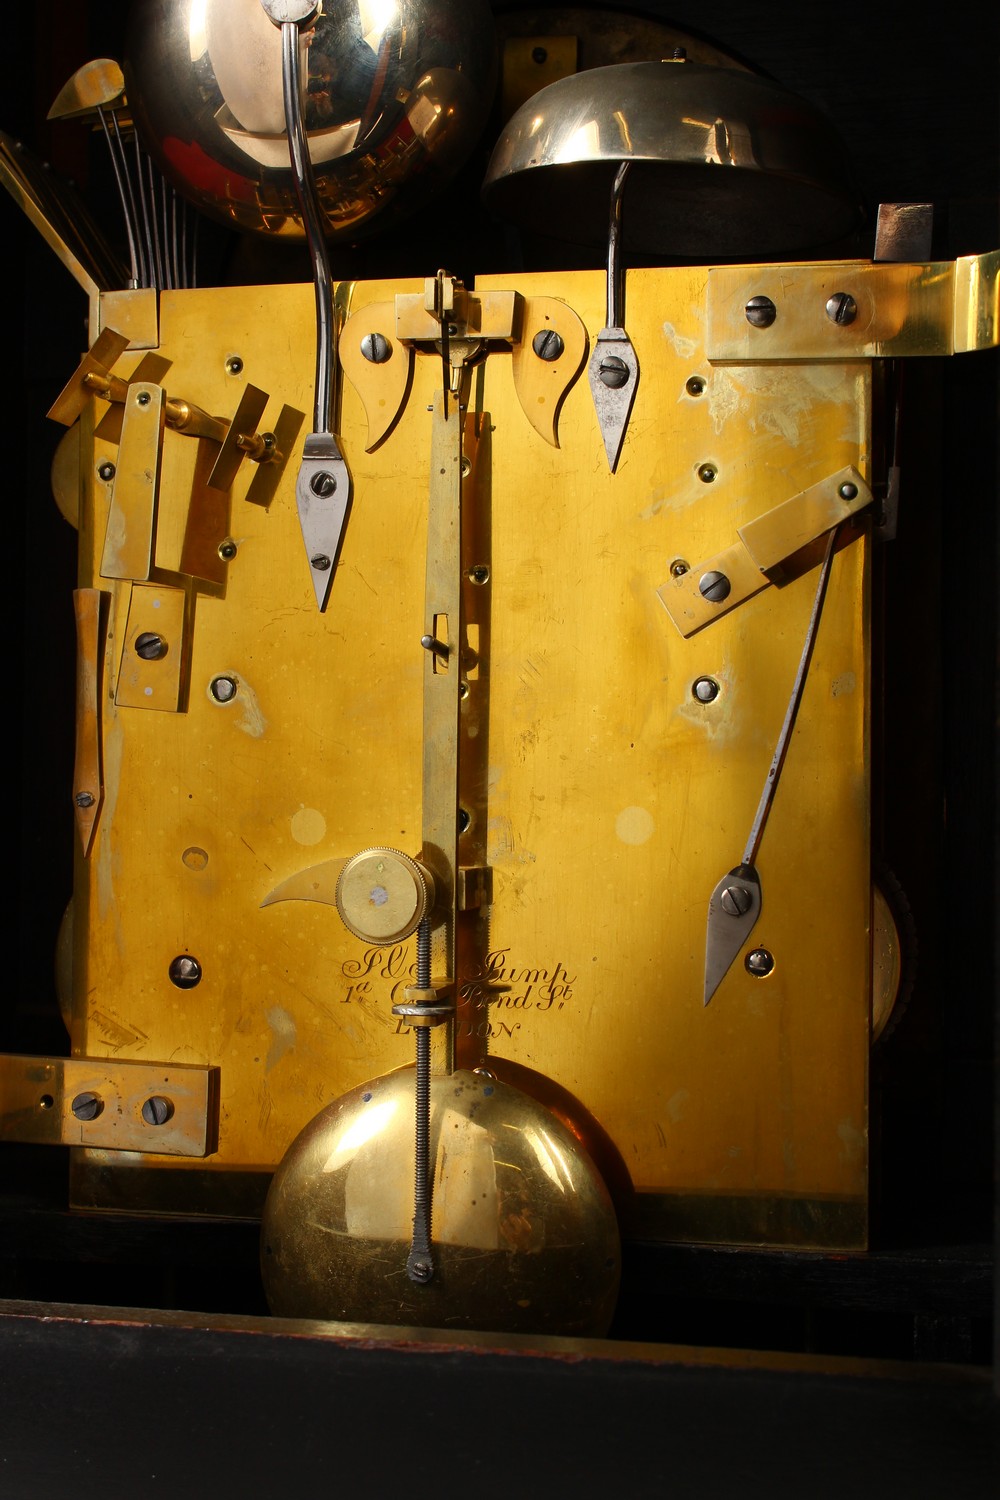 A VERY GOOD 19TH CENTURY LACQUER BRACKET CLOCK by J. & A. JUMP, 1A OLD BOND STREET, LONDON, with - Image 8 of 18